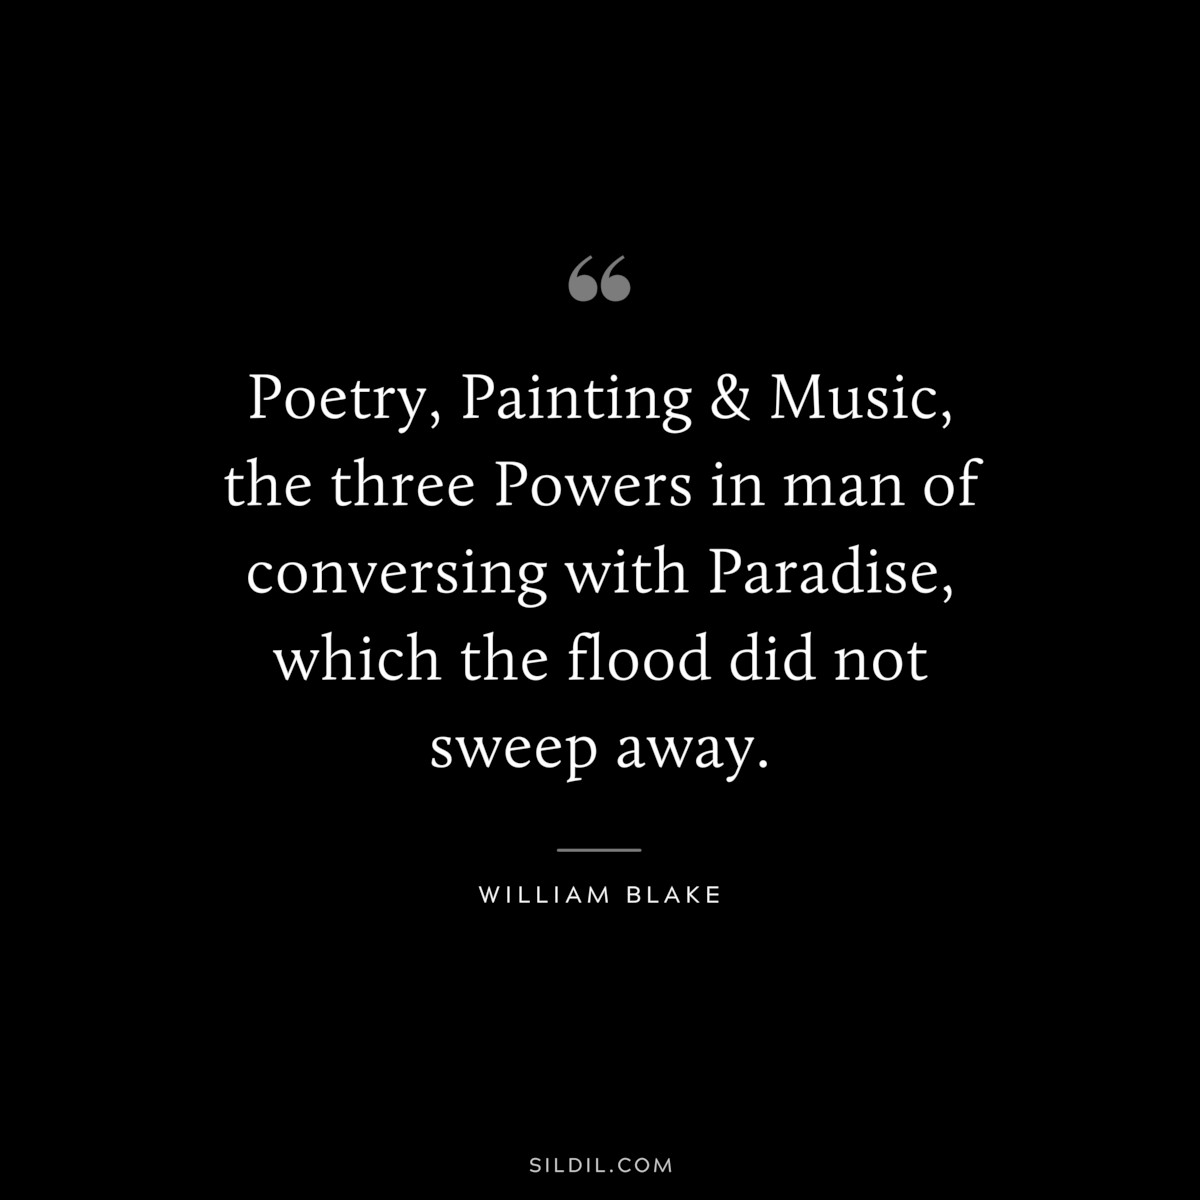 Poetry, Painting & Music, the three Powers in man of conversing with Paradise, which the flood did not sweep away. ― William Blake